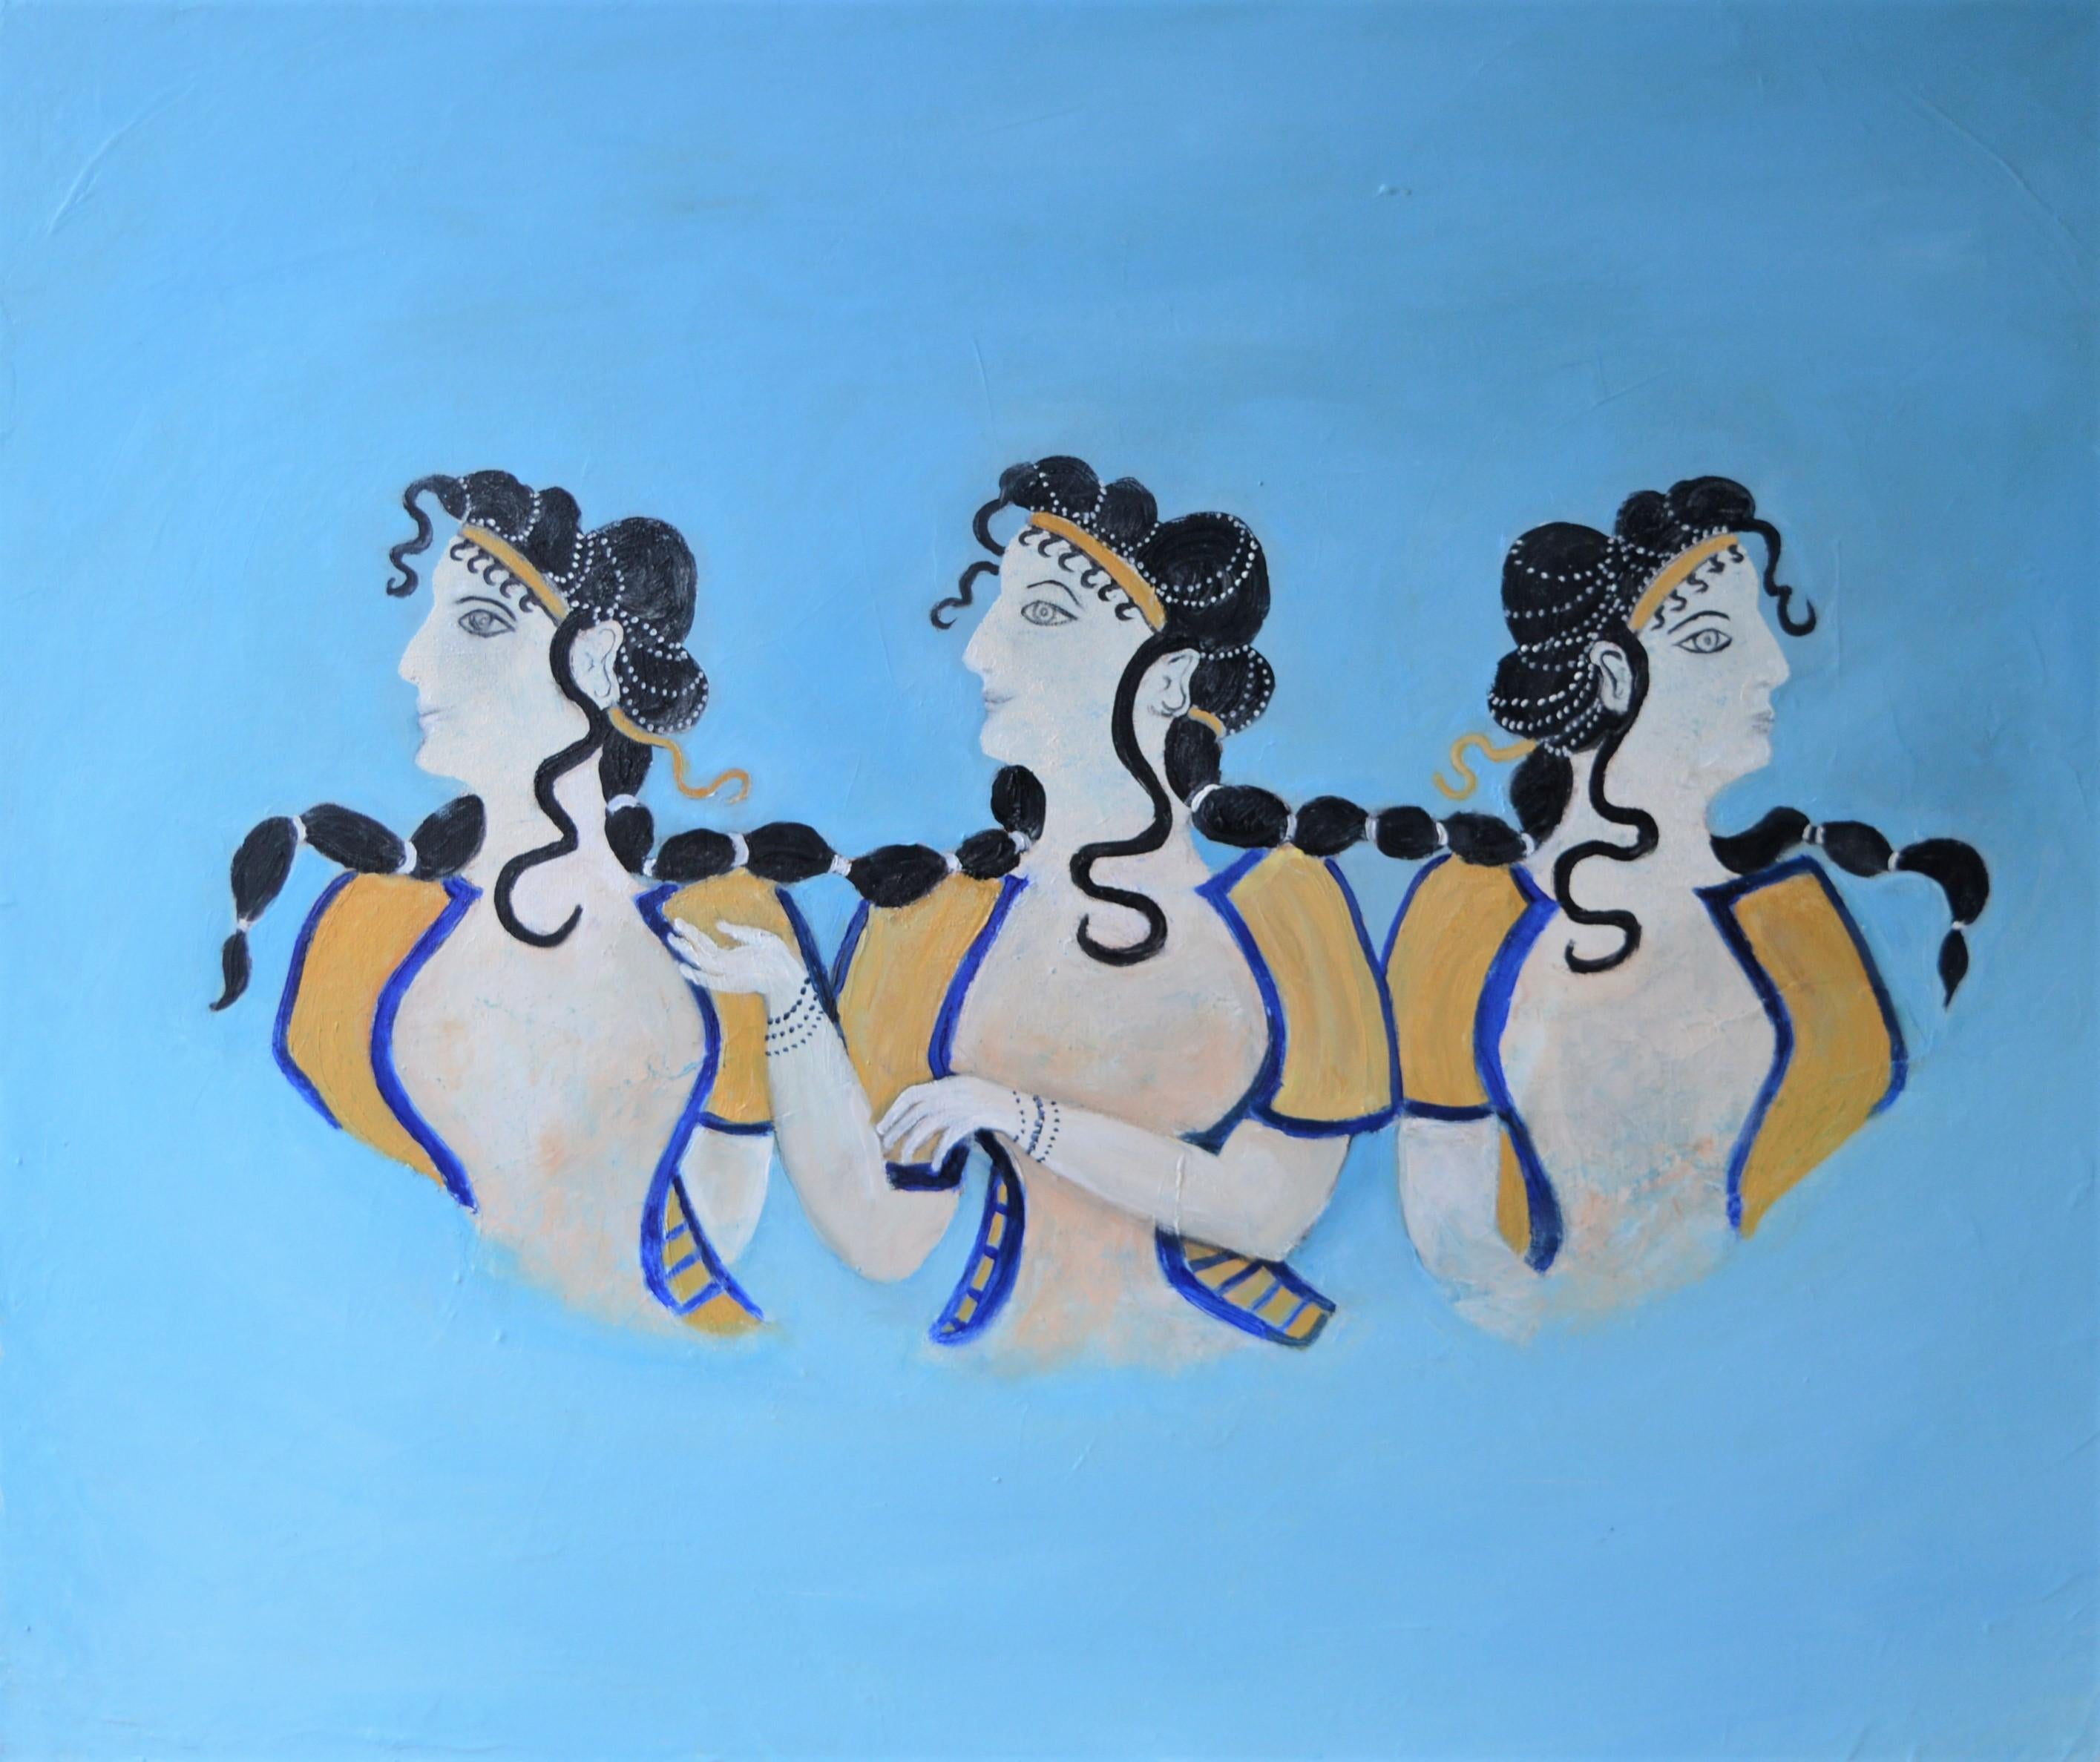 Penny Rumble Figurative Painting - Minoan Dancers:  Contemporary Figurative Oil painting